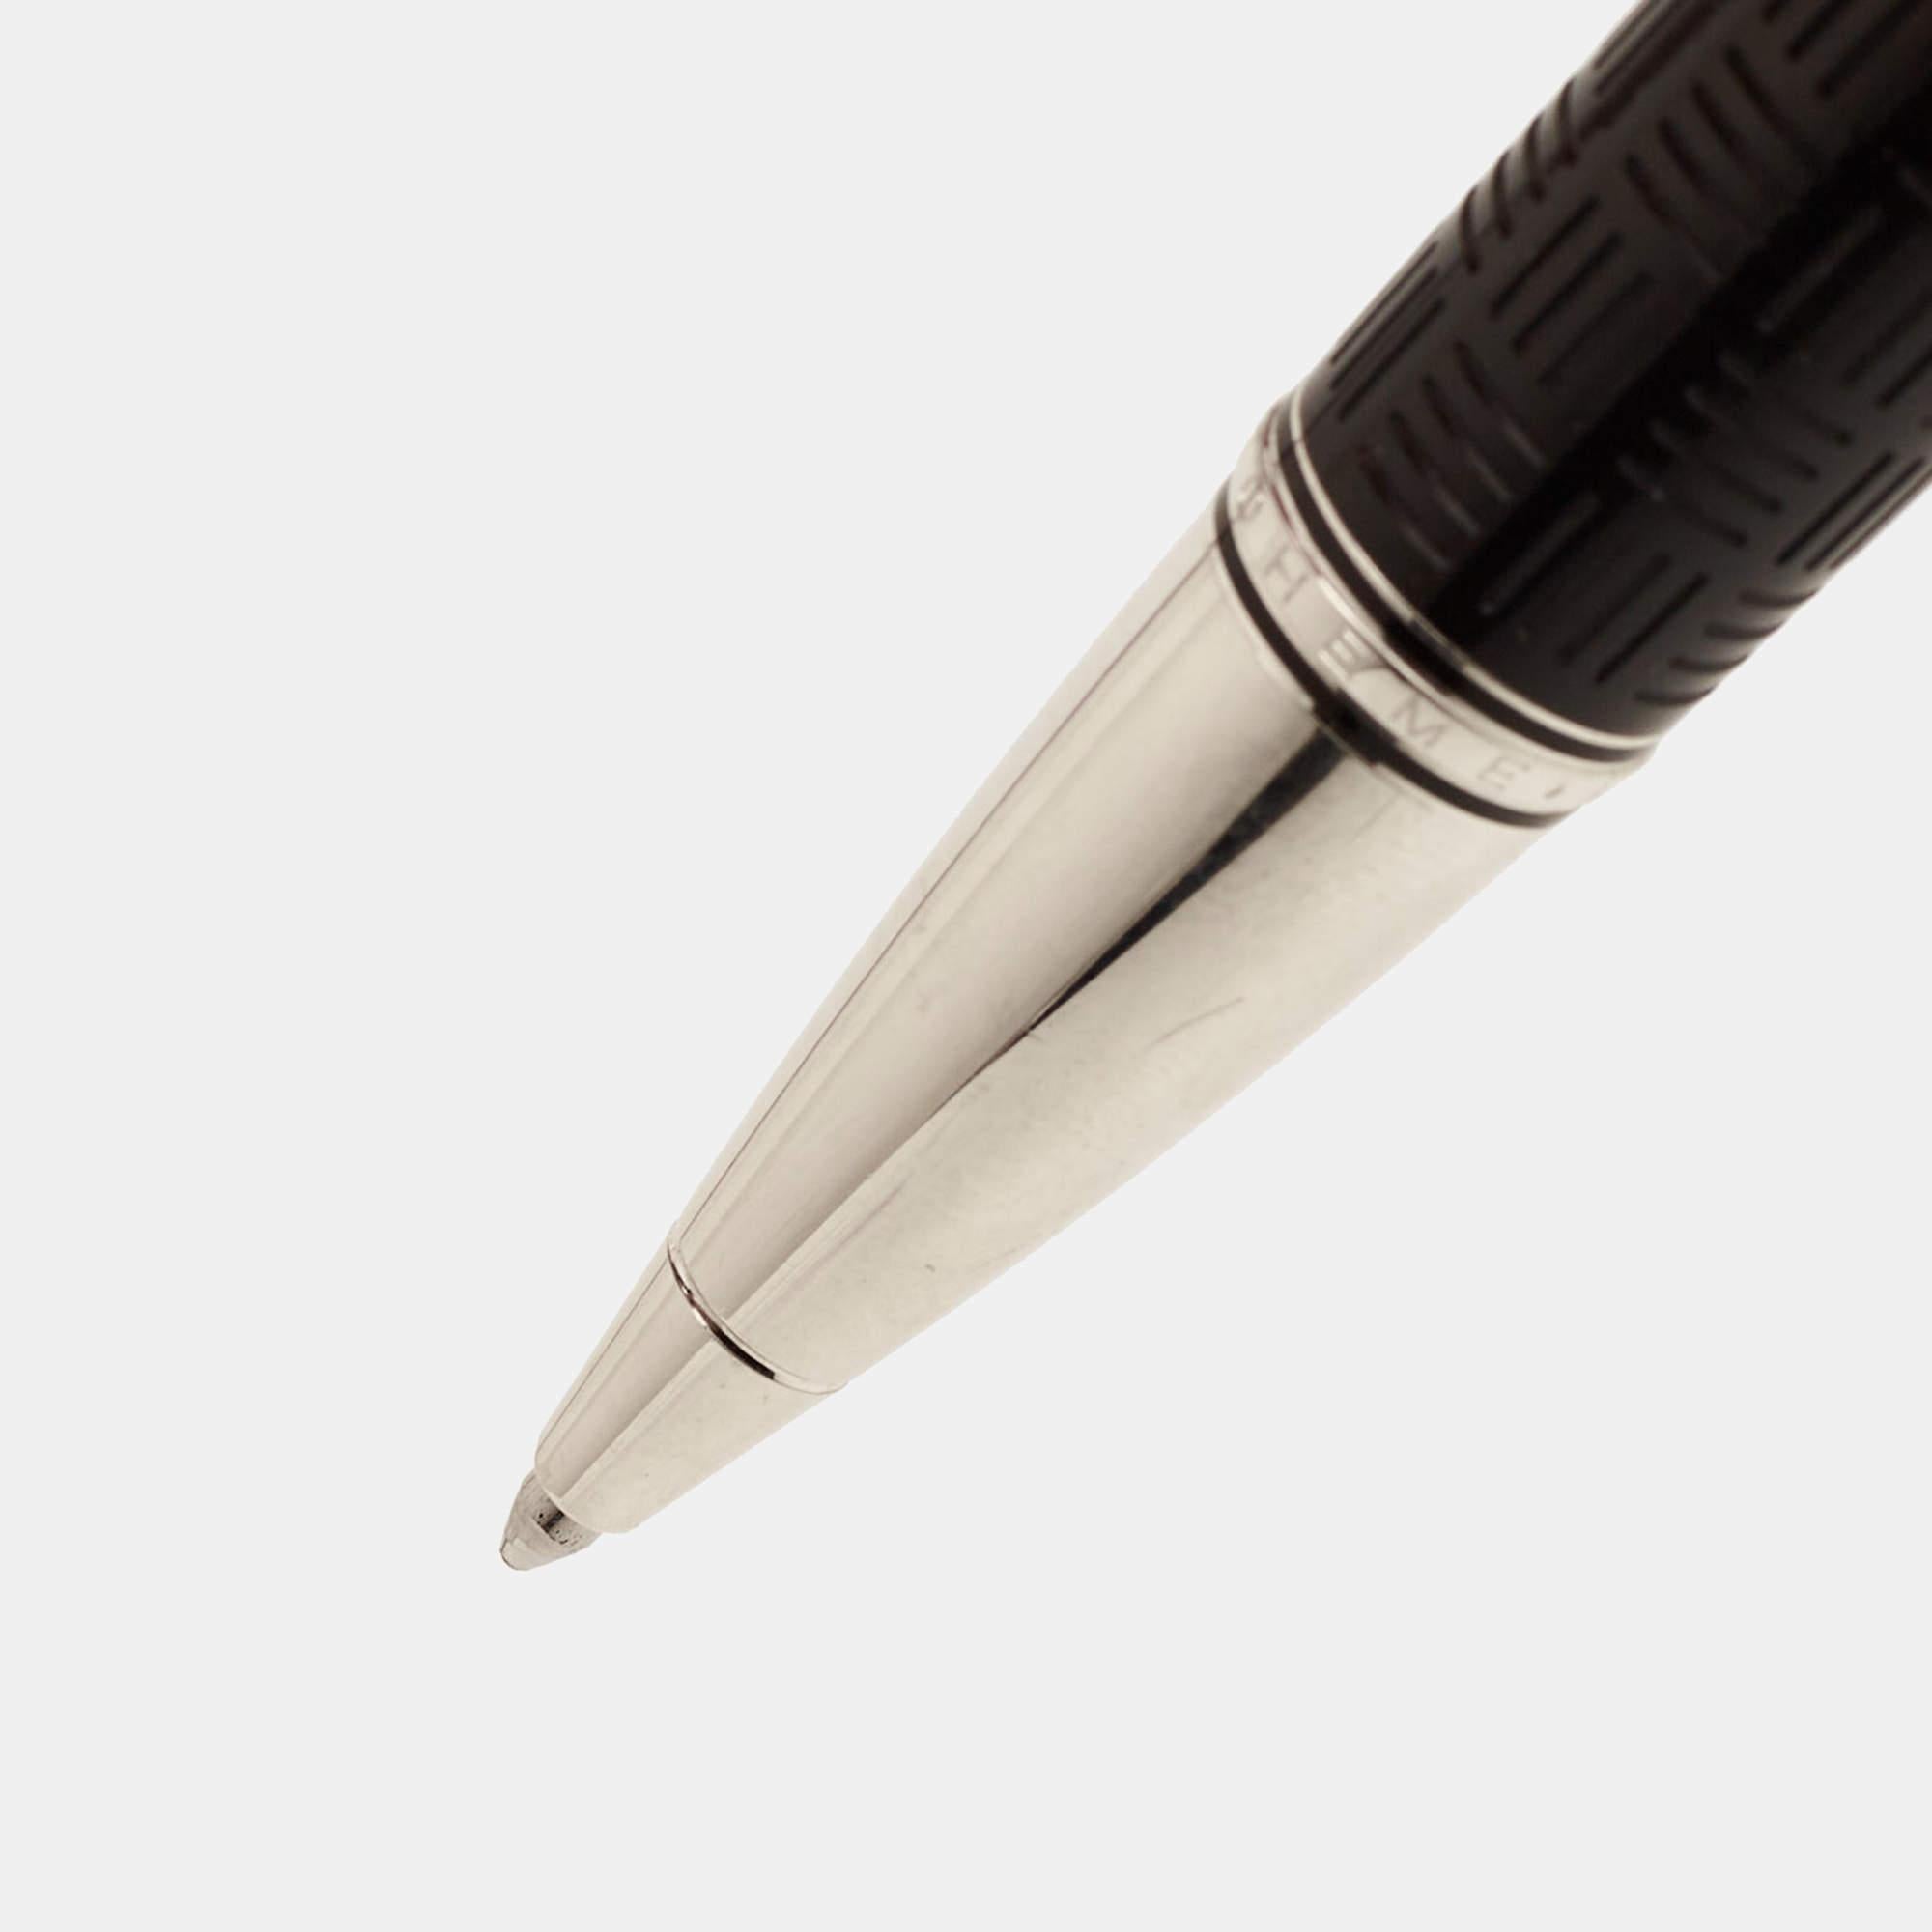 Part of the Boheme collection by Montblanc, this ballpoint pen features a precious resin body with silver-tone metal fittings. It has the iconic star symbol at the top for an unmissable look.

